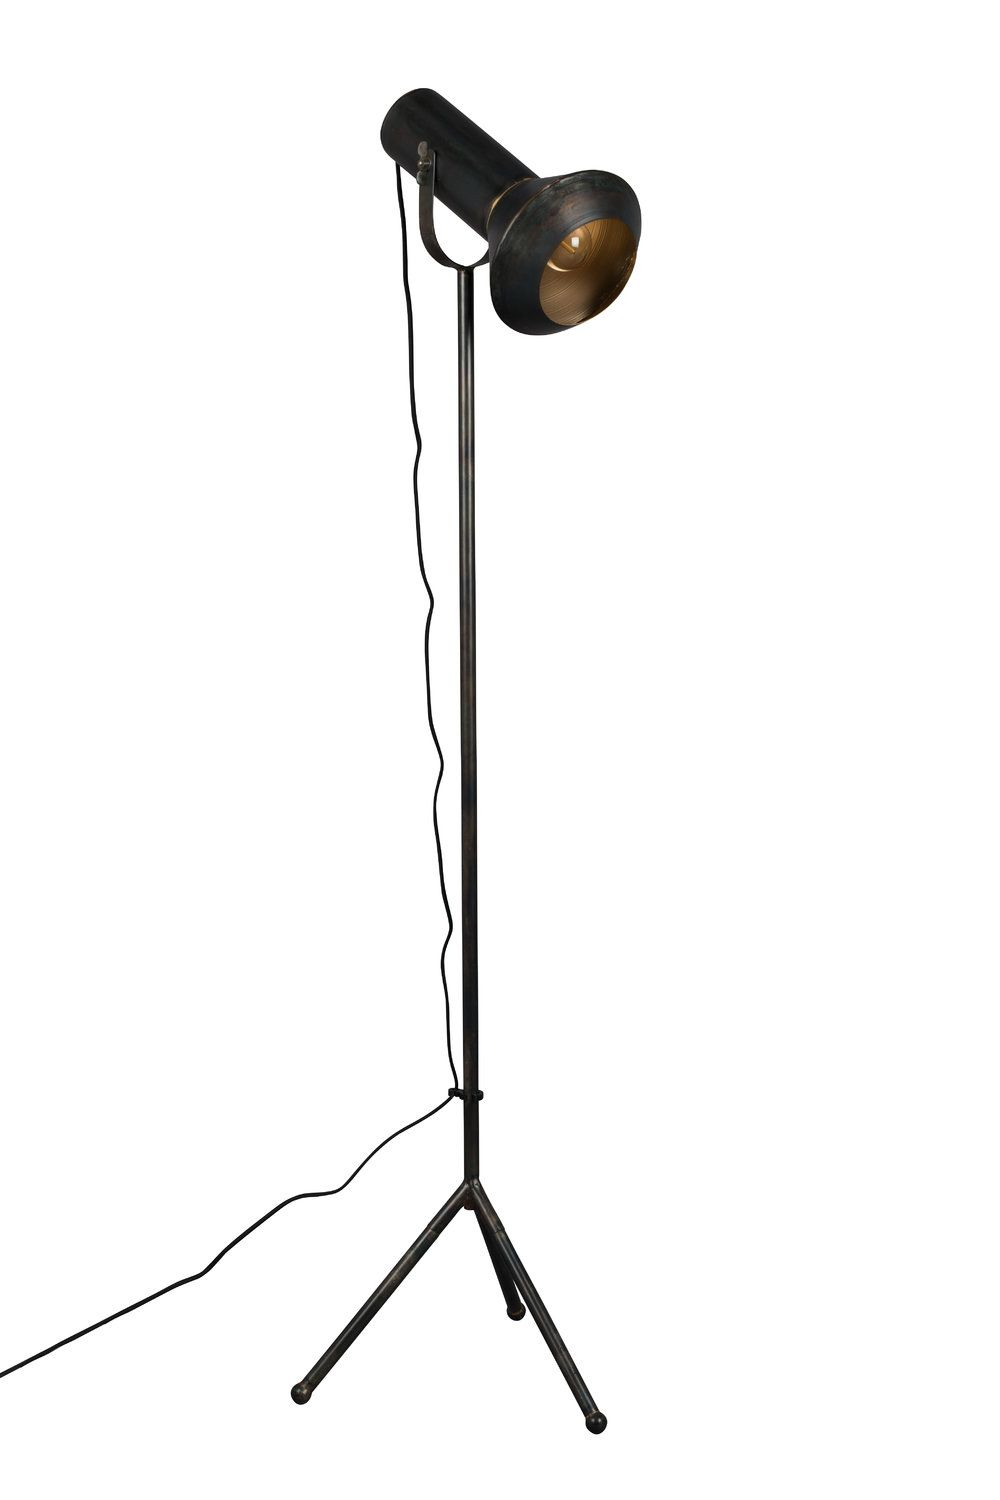 Dutchbone Vox Is An Edgy Industrial Floor Lamp With An intended for dimensions 1000 X 1500